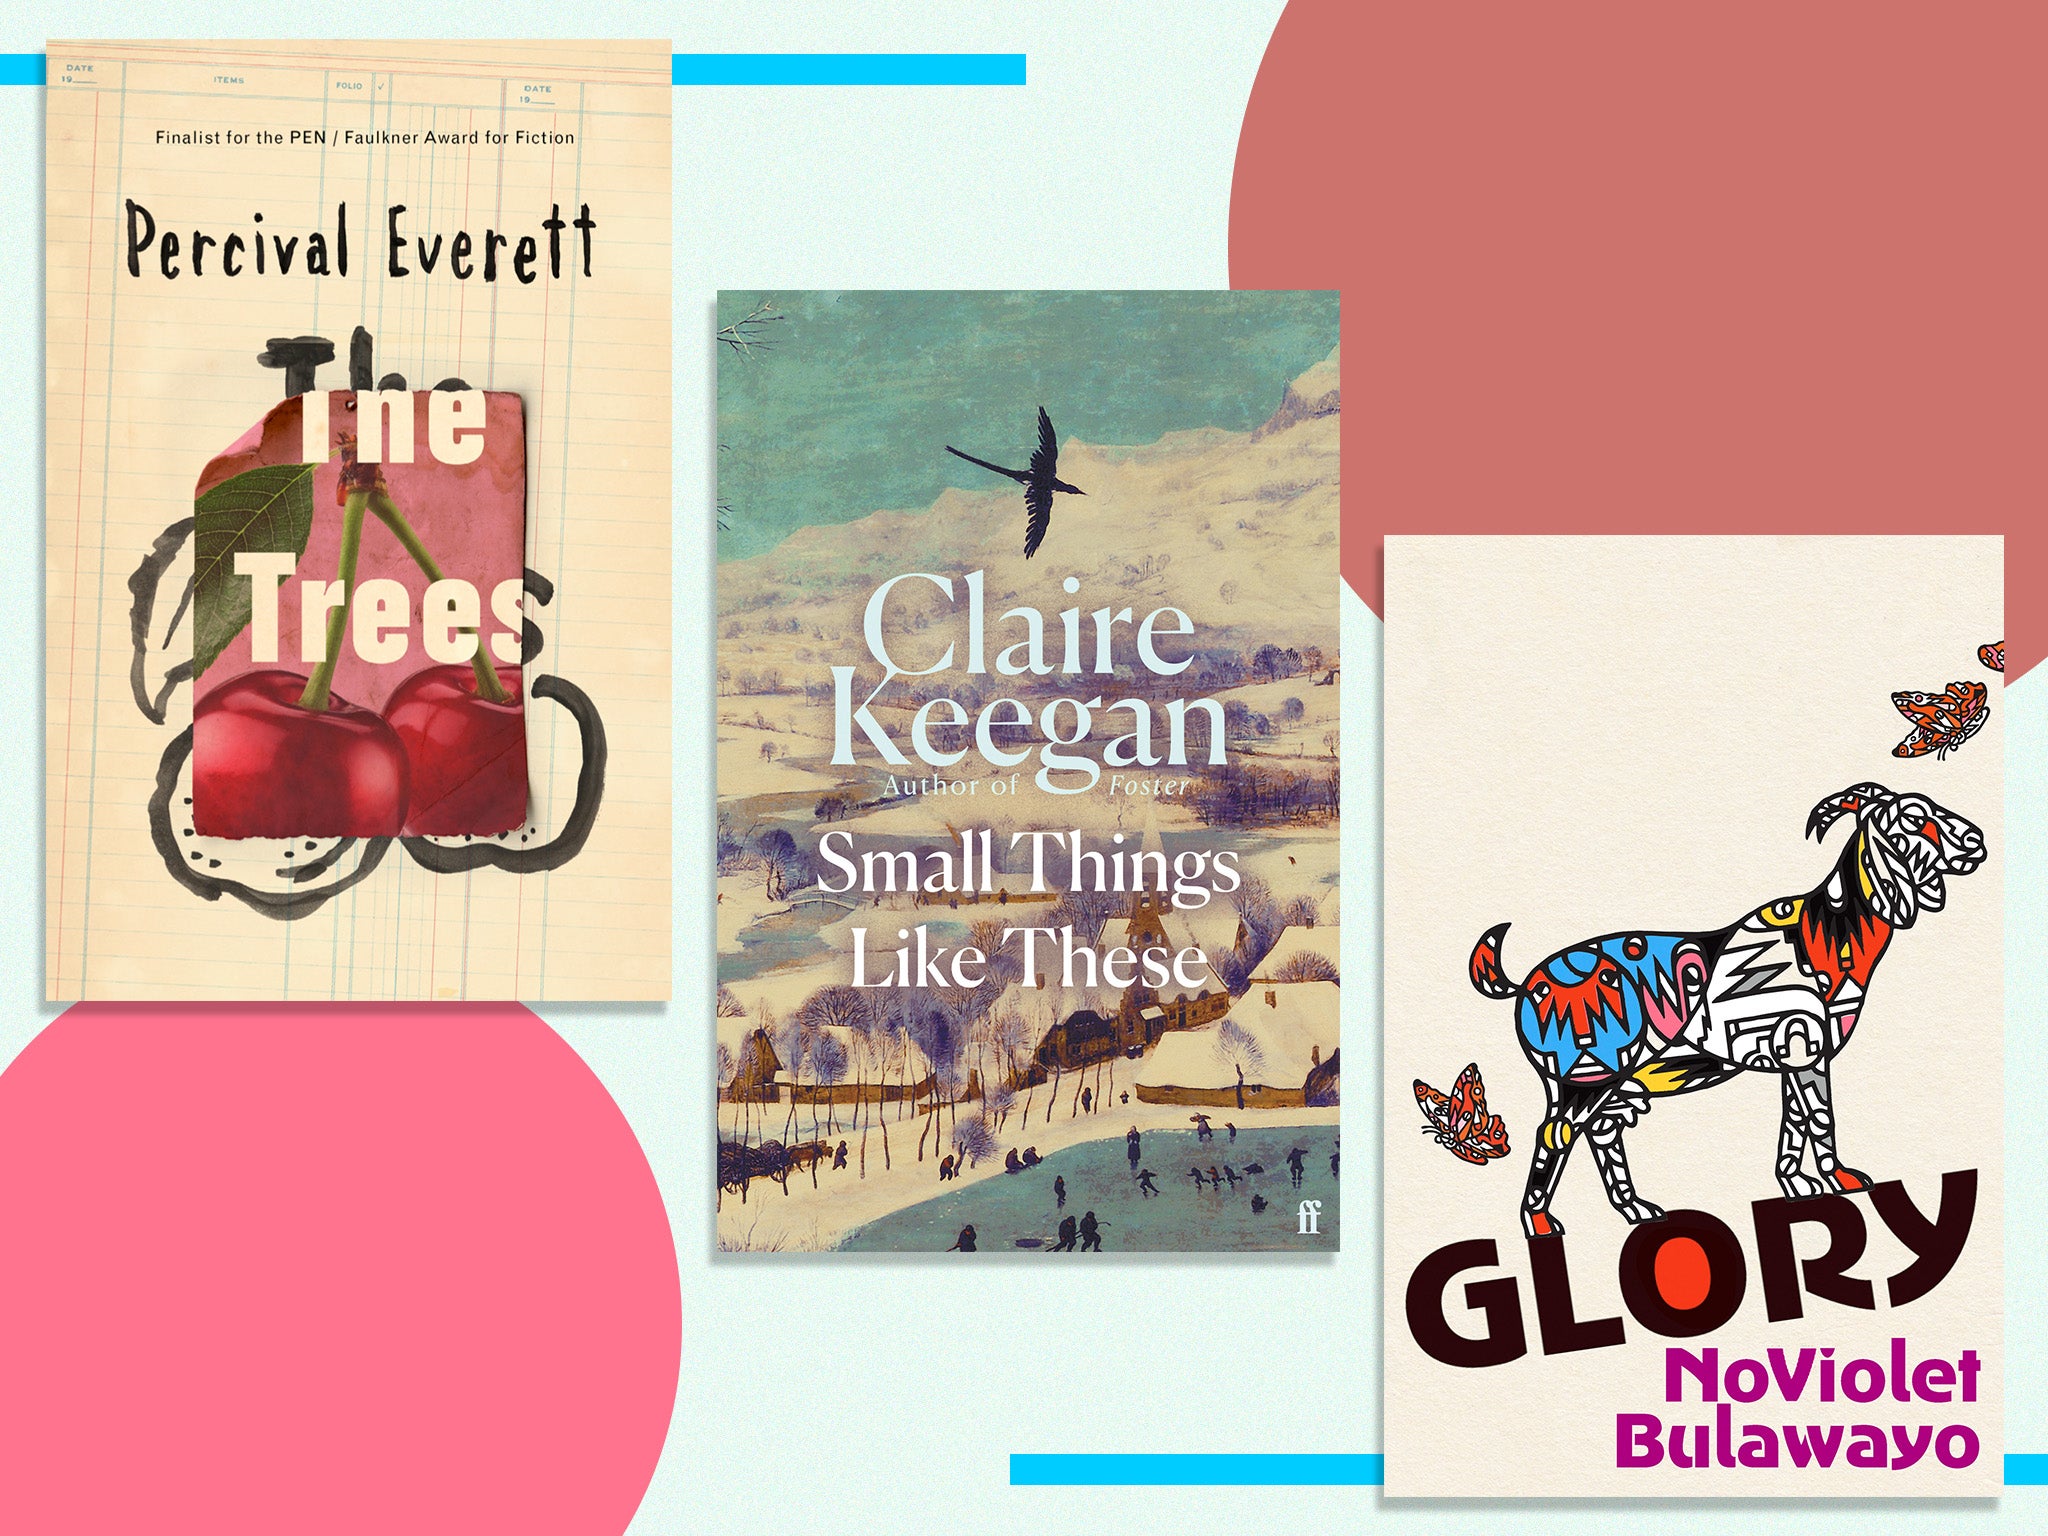 Claire Keegan  The Booker Prizes